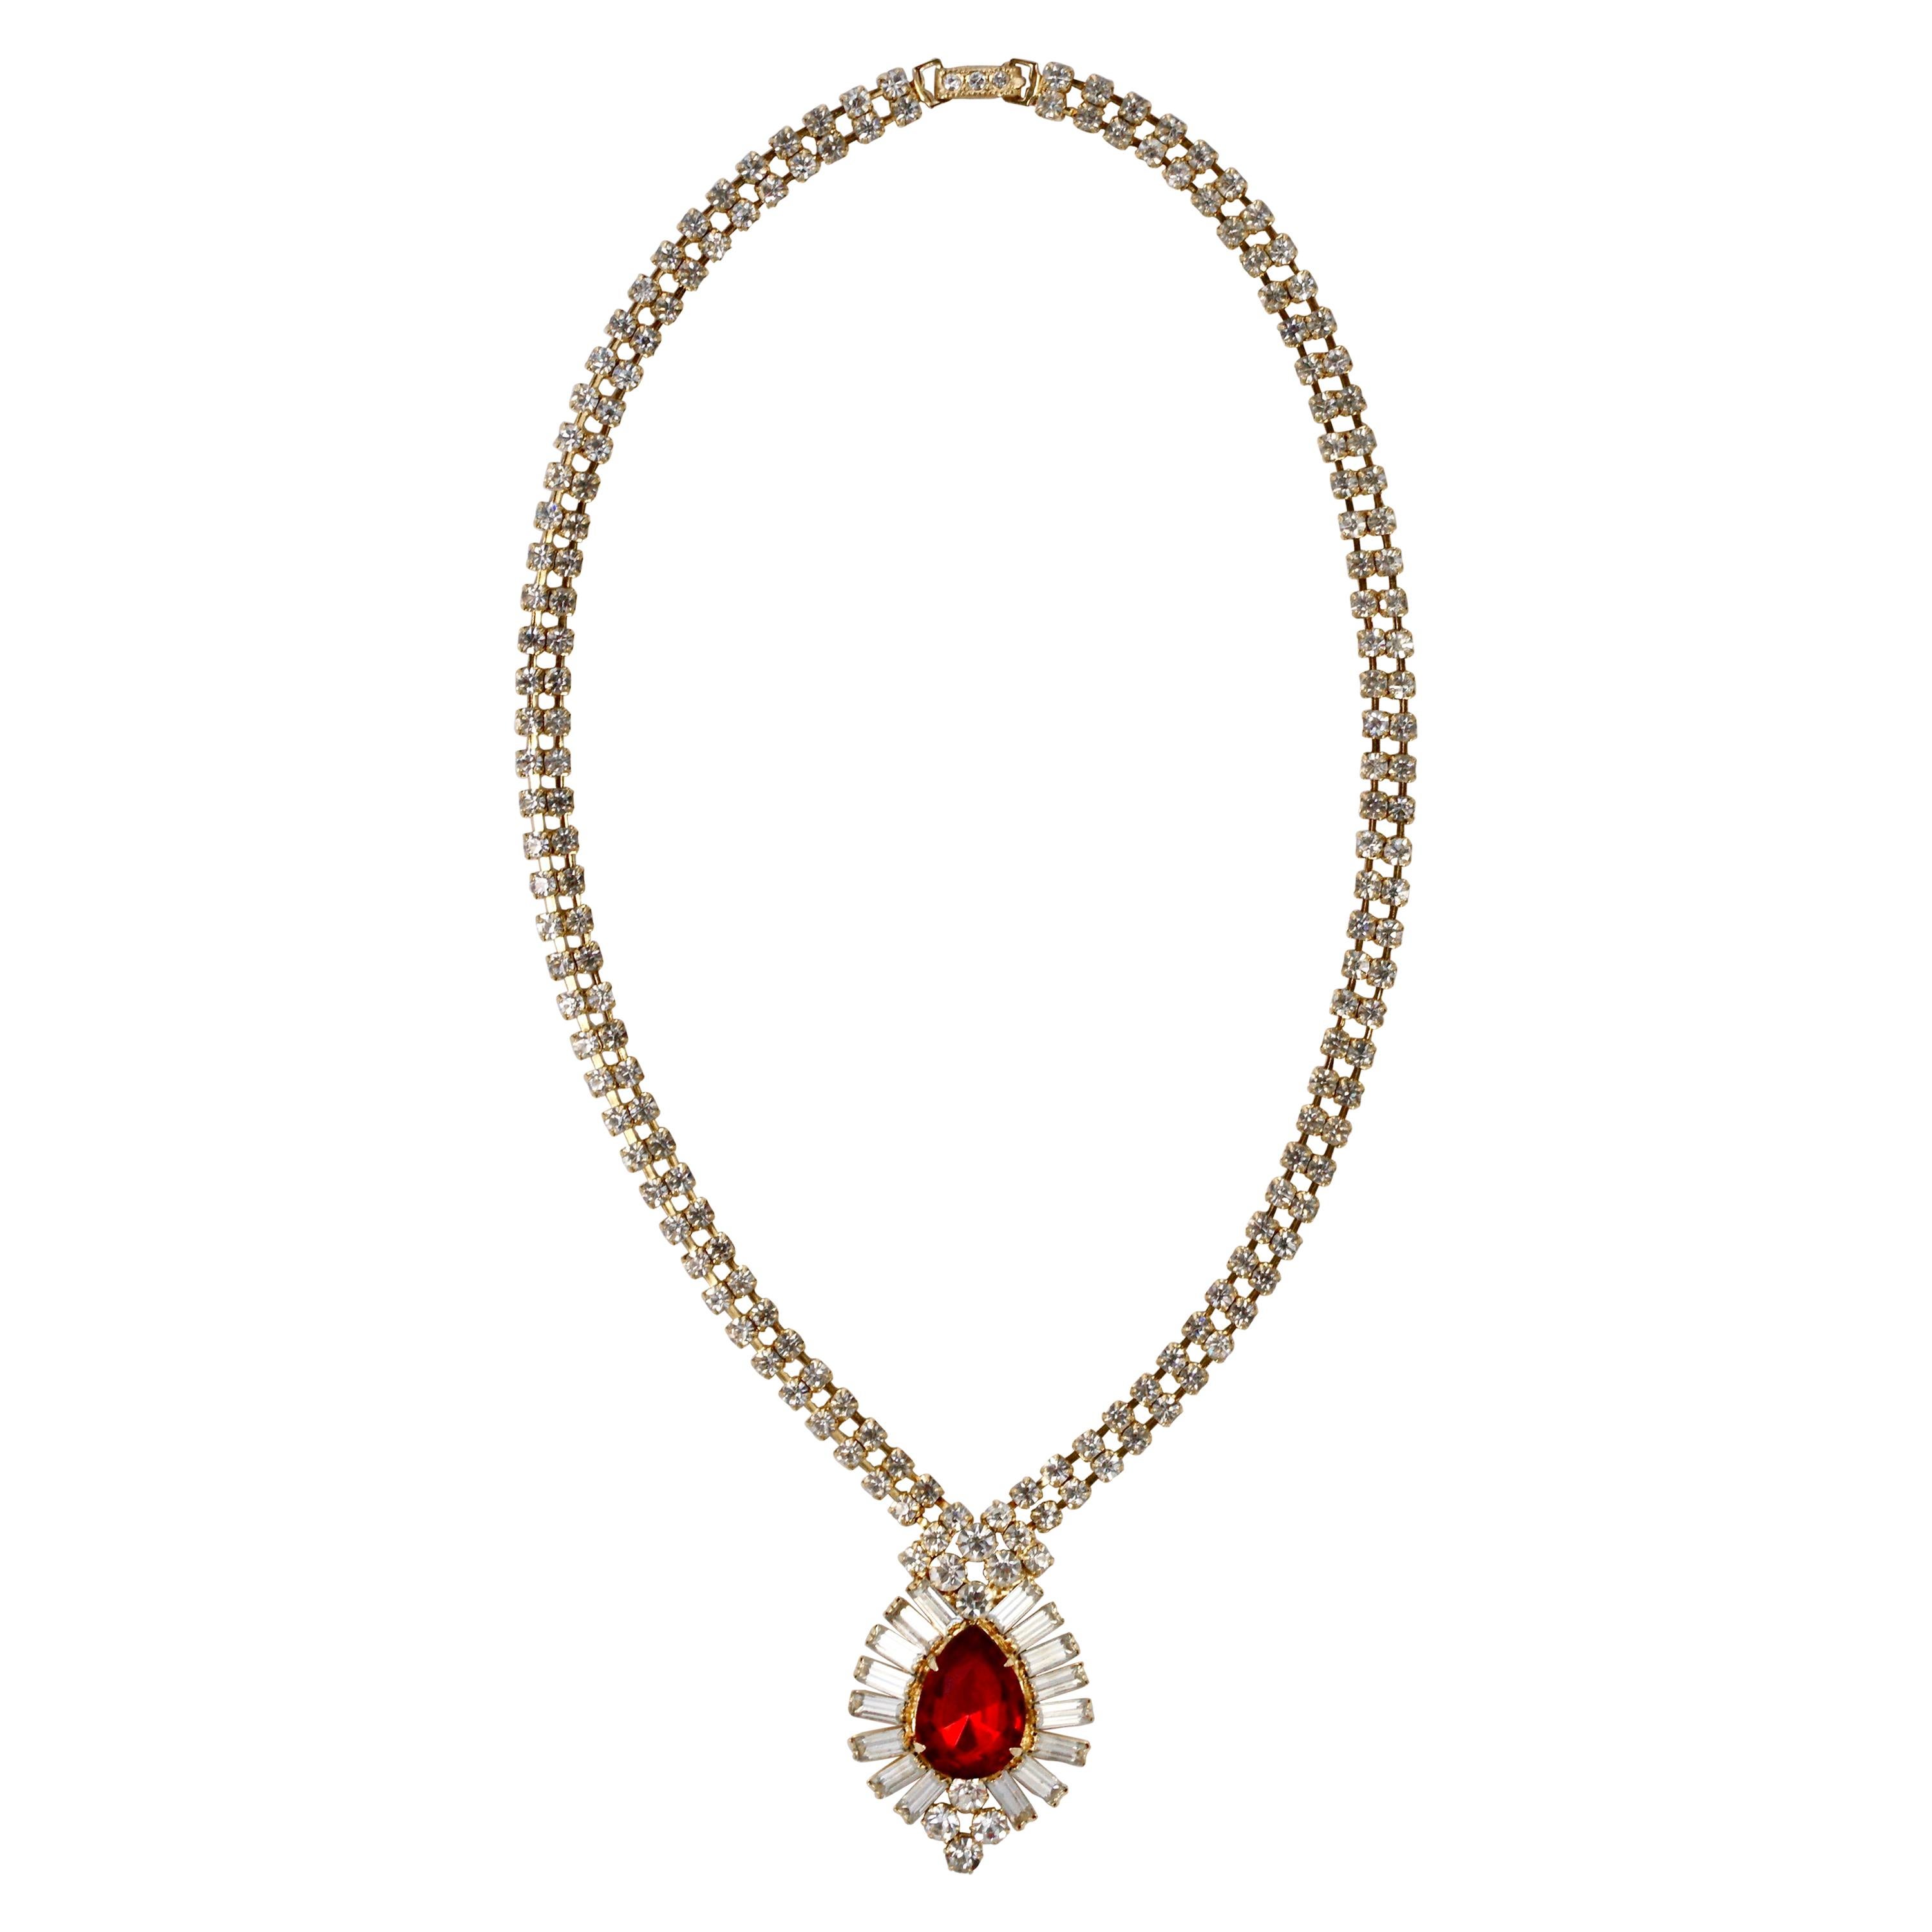  Gold Tone Pendant Necklace with Clear Rhinestones and a Red Rhinestone Teardrop For Sale